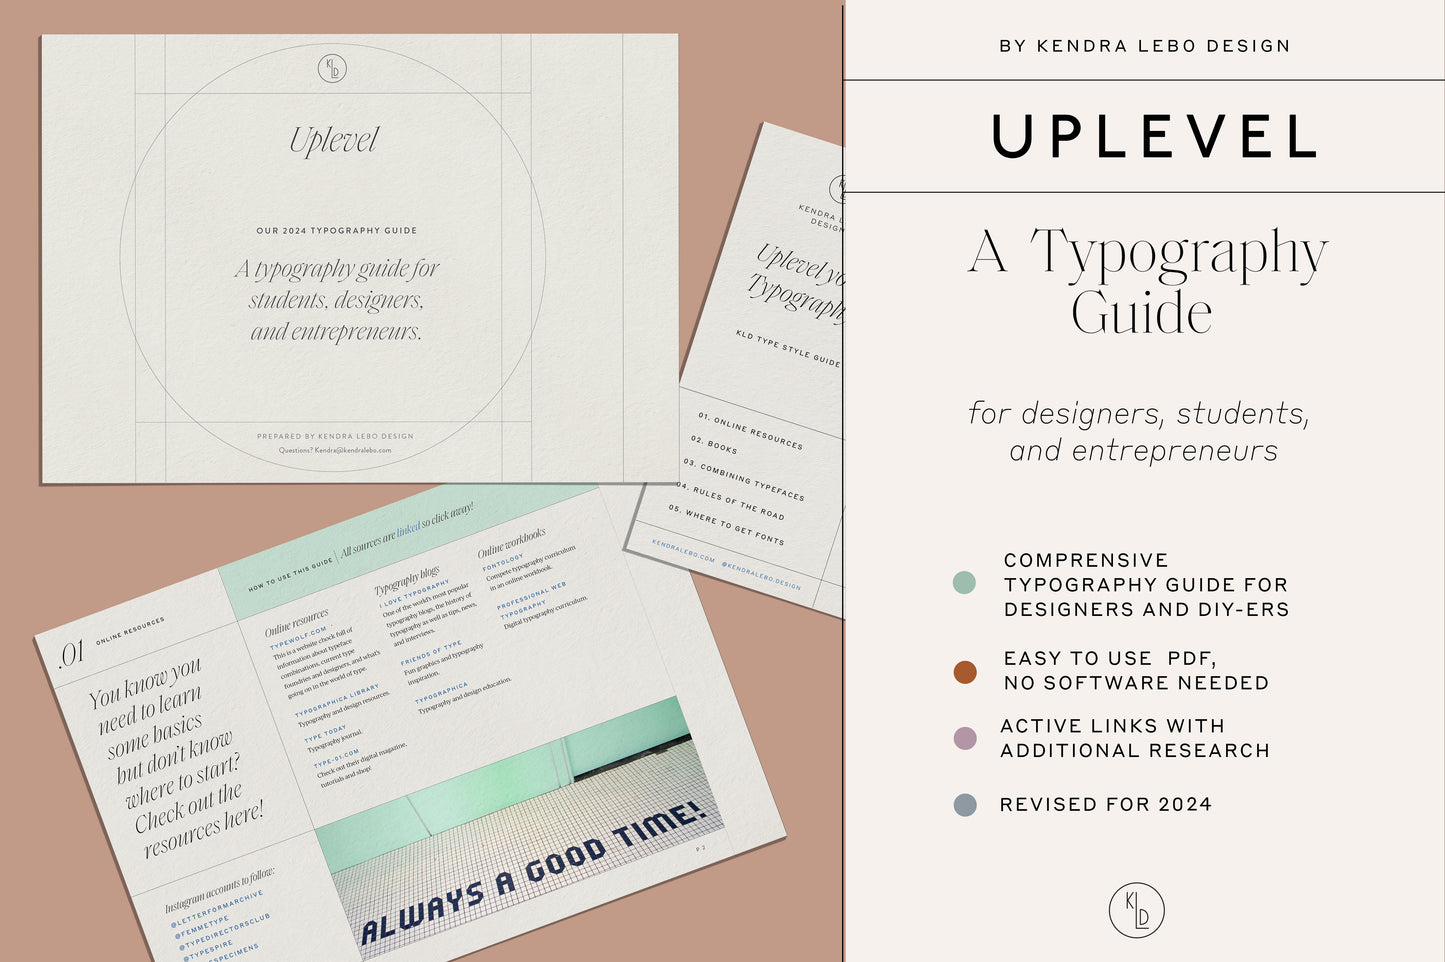 Uplevel: Our 2024 Typography Guide